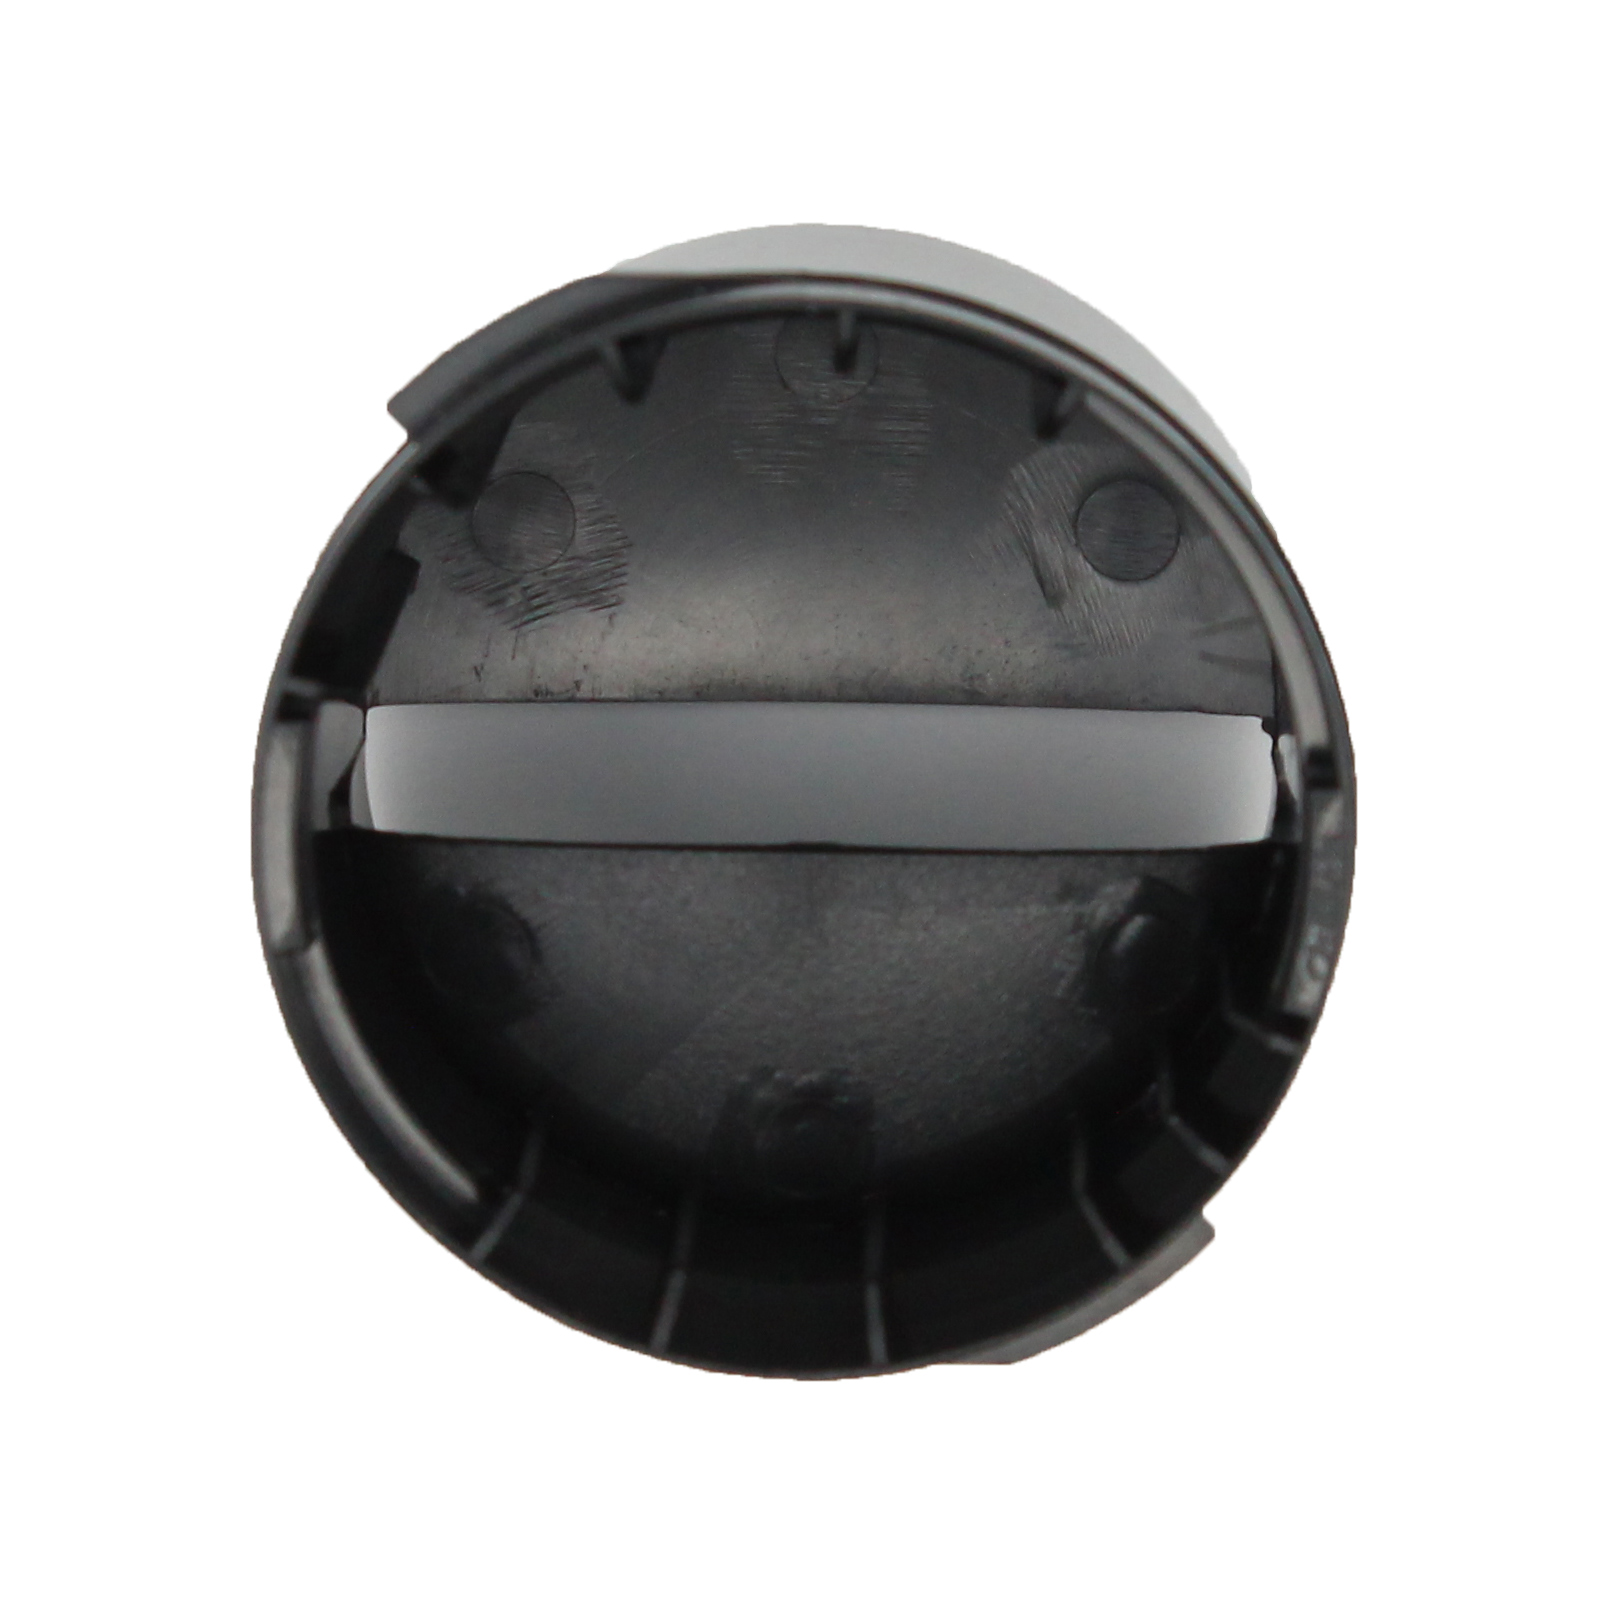 2260502B Refrigerator Water Filter Cap Replacement for KitchenAid KBLO36FTX05 Refrigerator - Compatible with WP2260518B Black Water Filter Cap - UpStart Components Brand - image 2 of 4